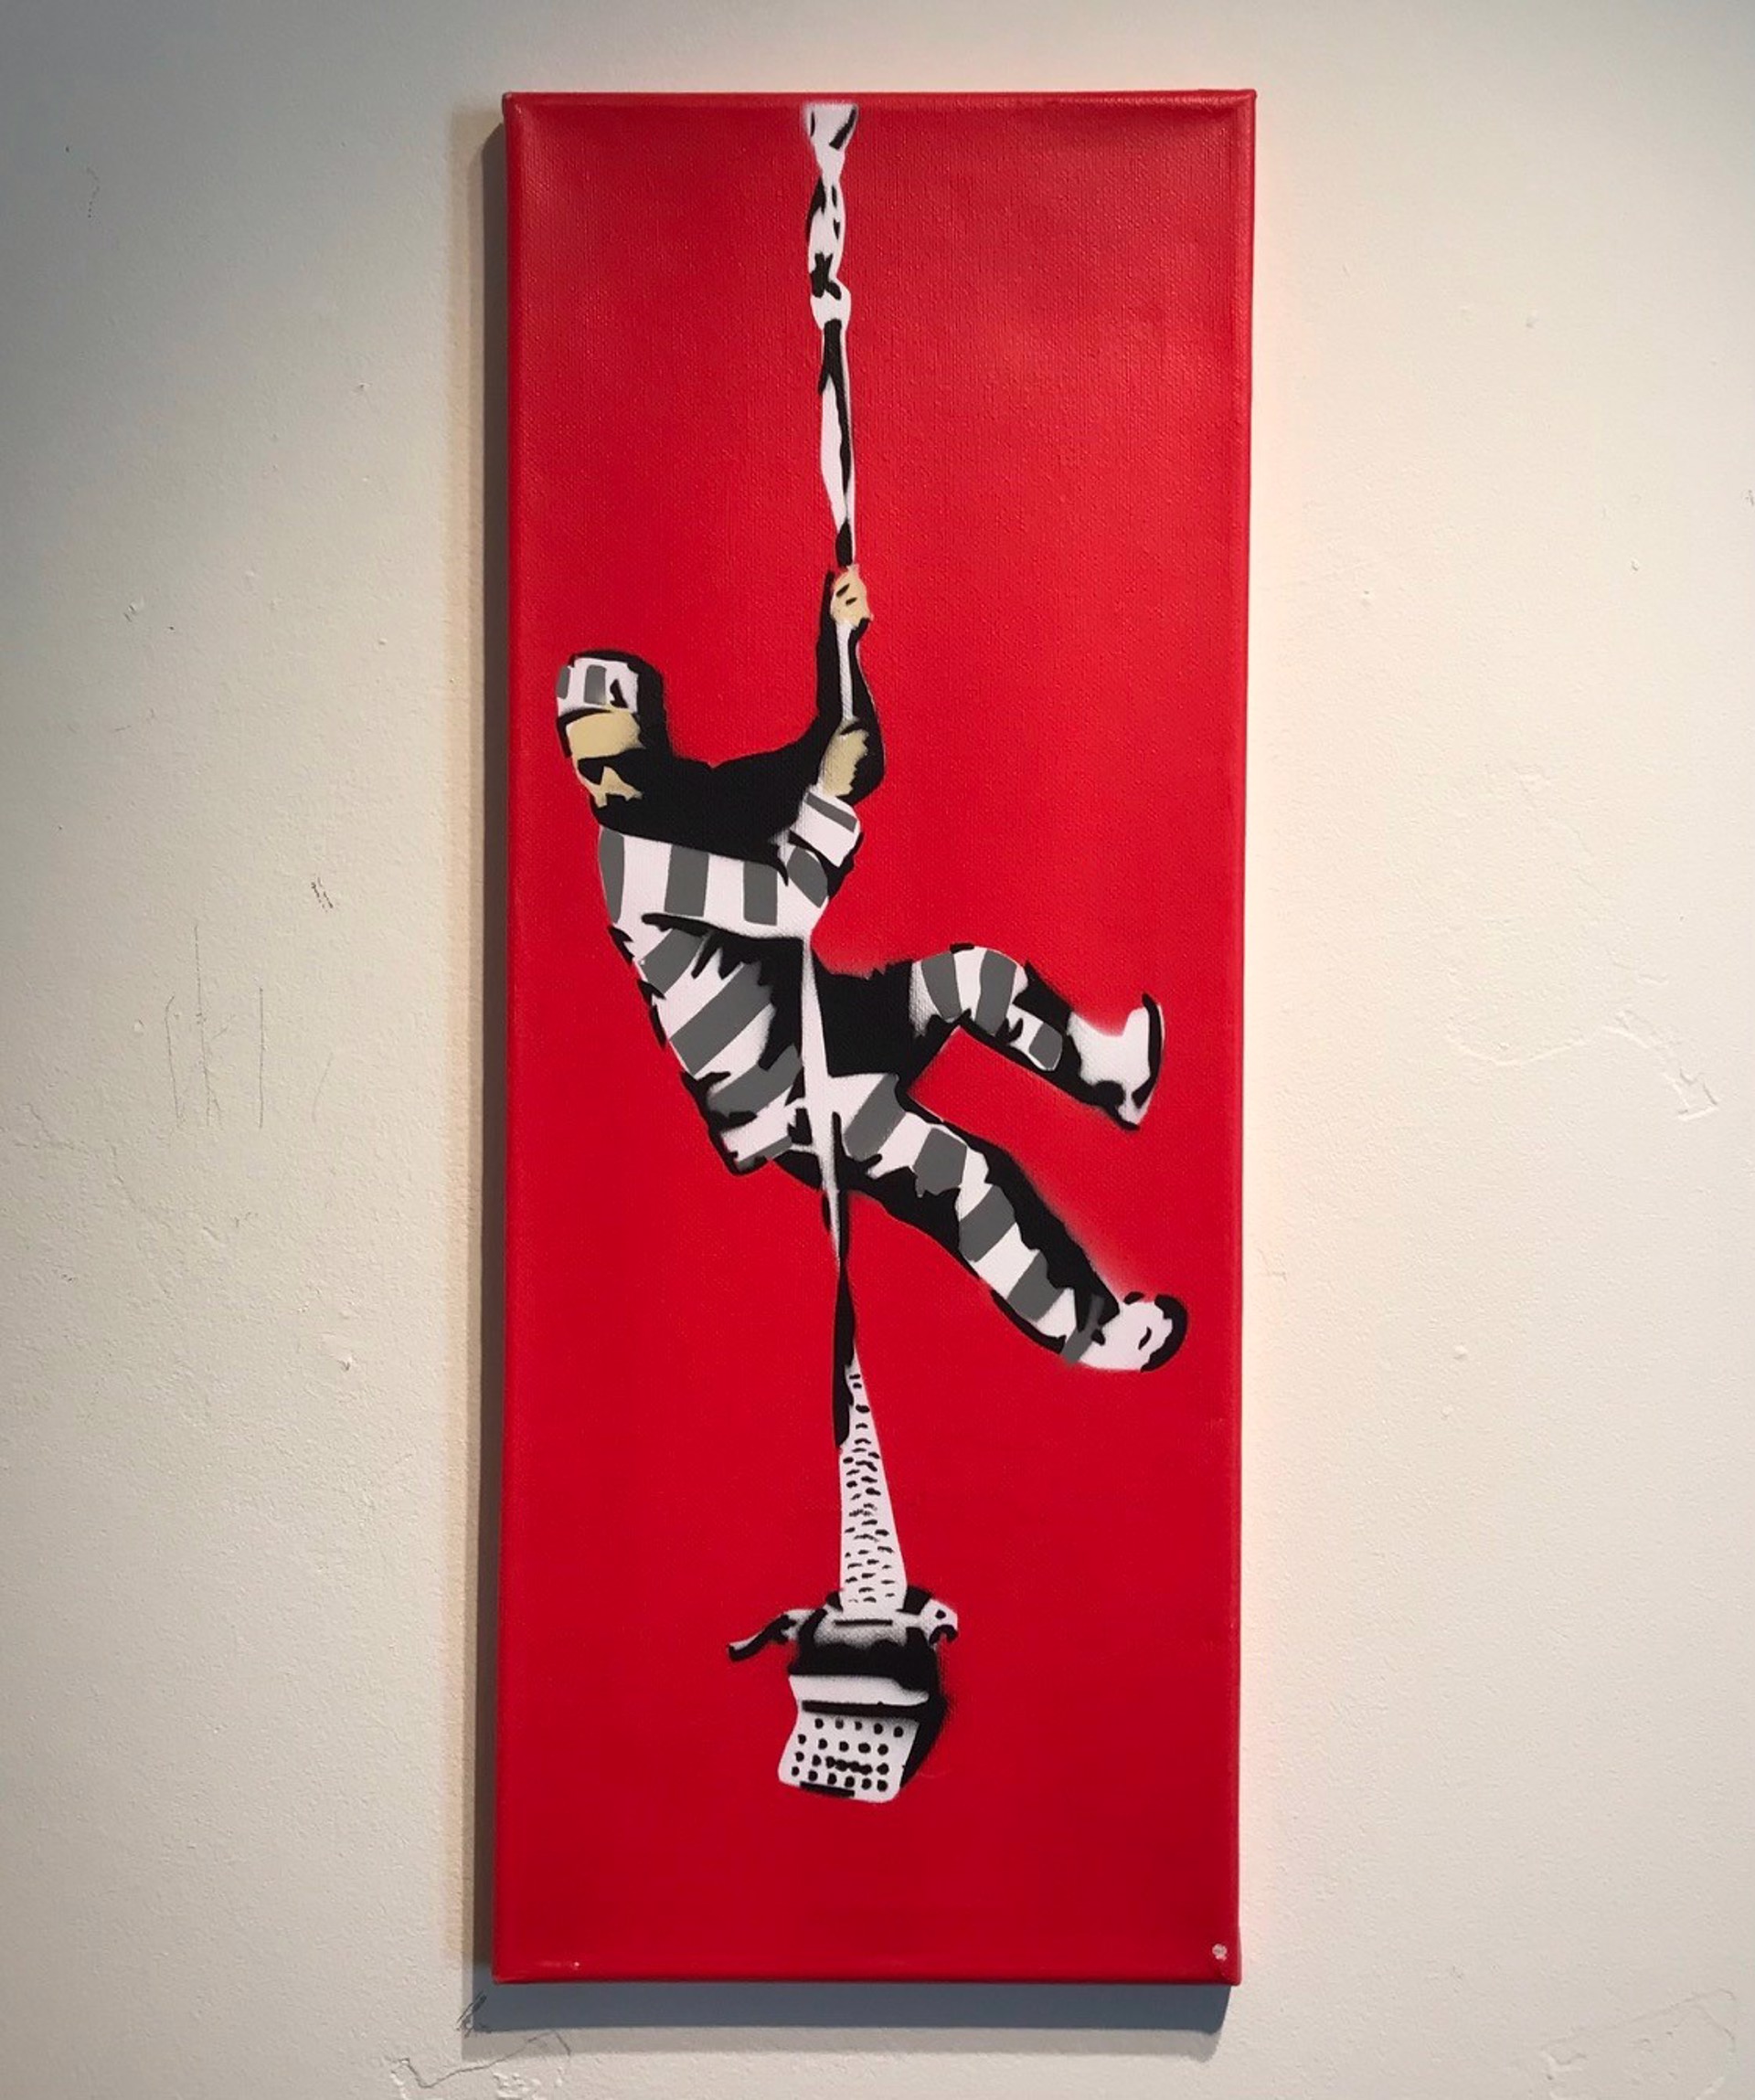 Create Escape (Red) 2/3 by Not Banksy